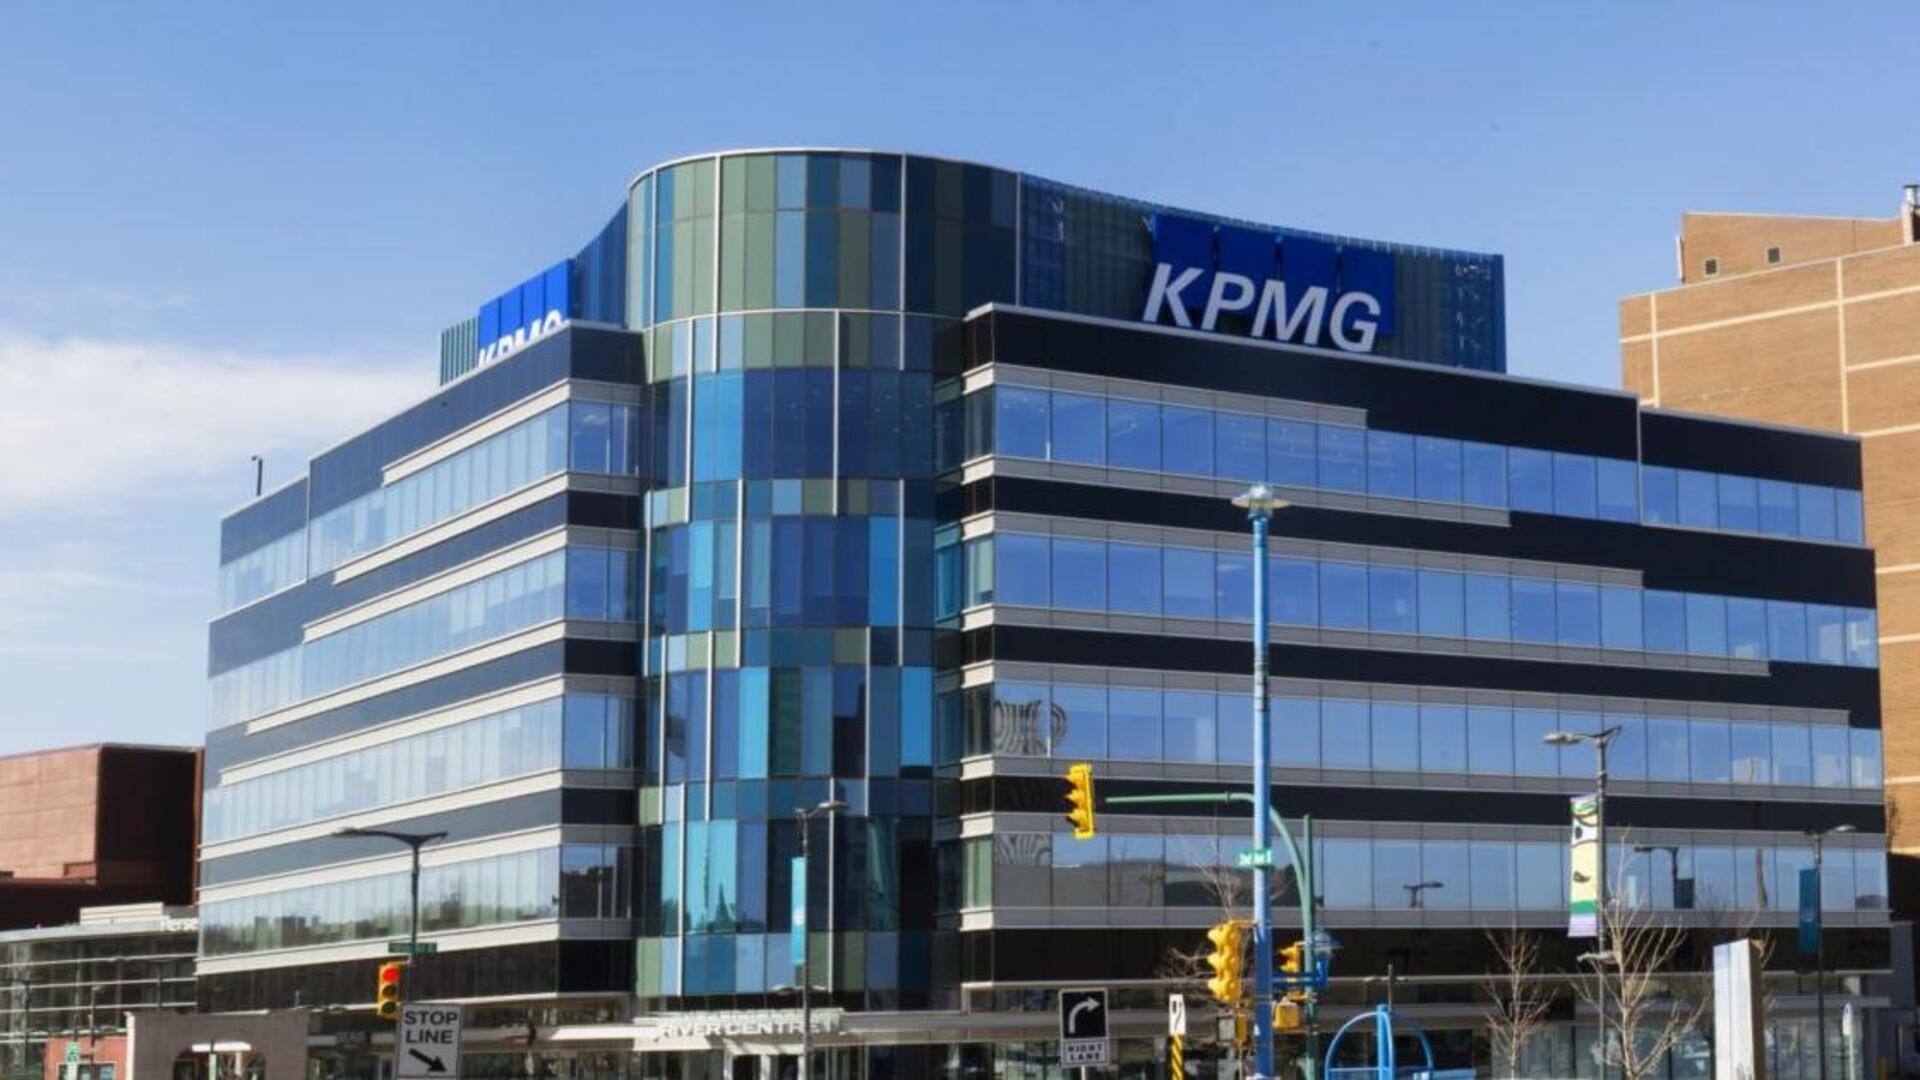 KPMG cuts 110 jobs in UK deal advisory division